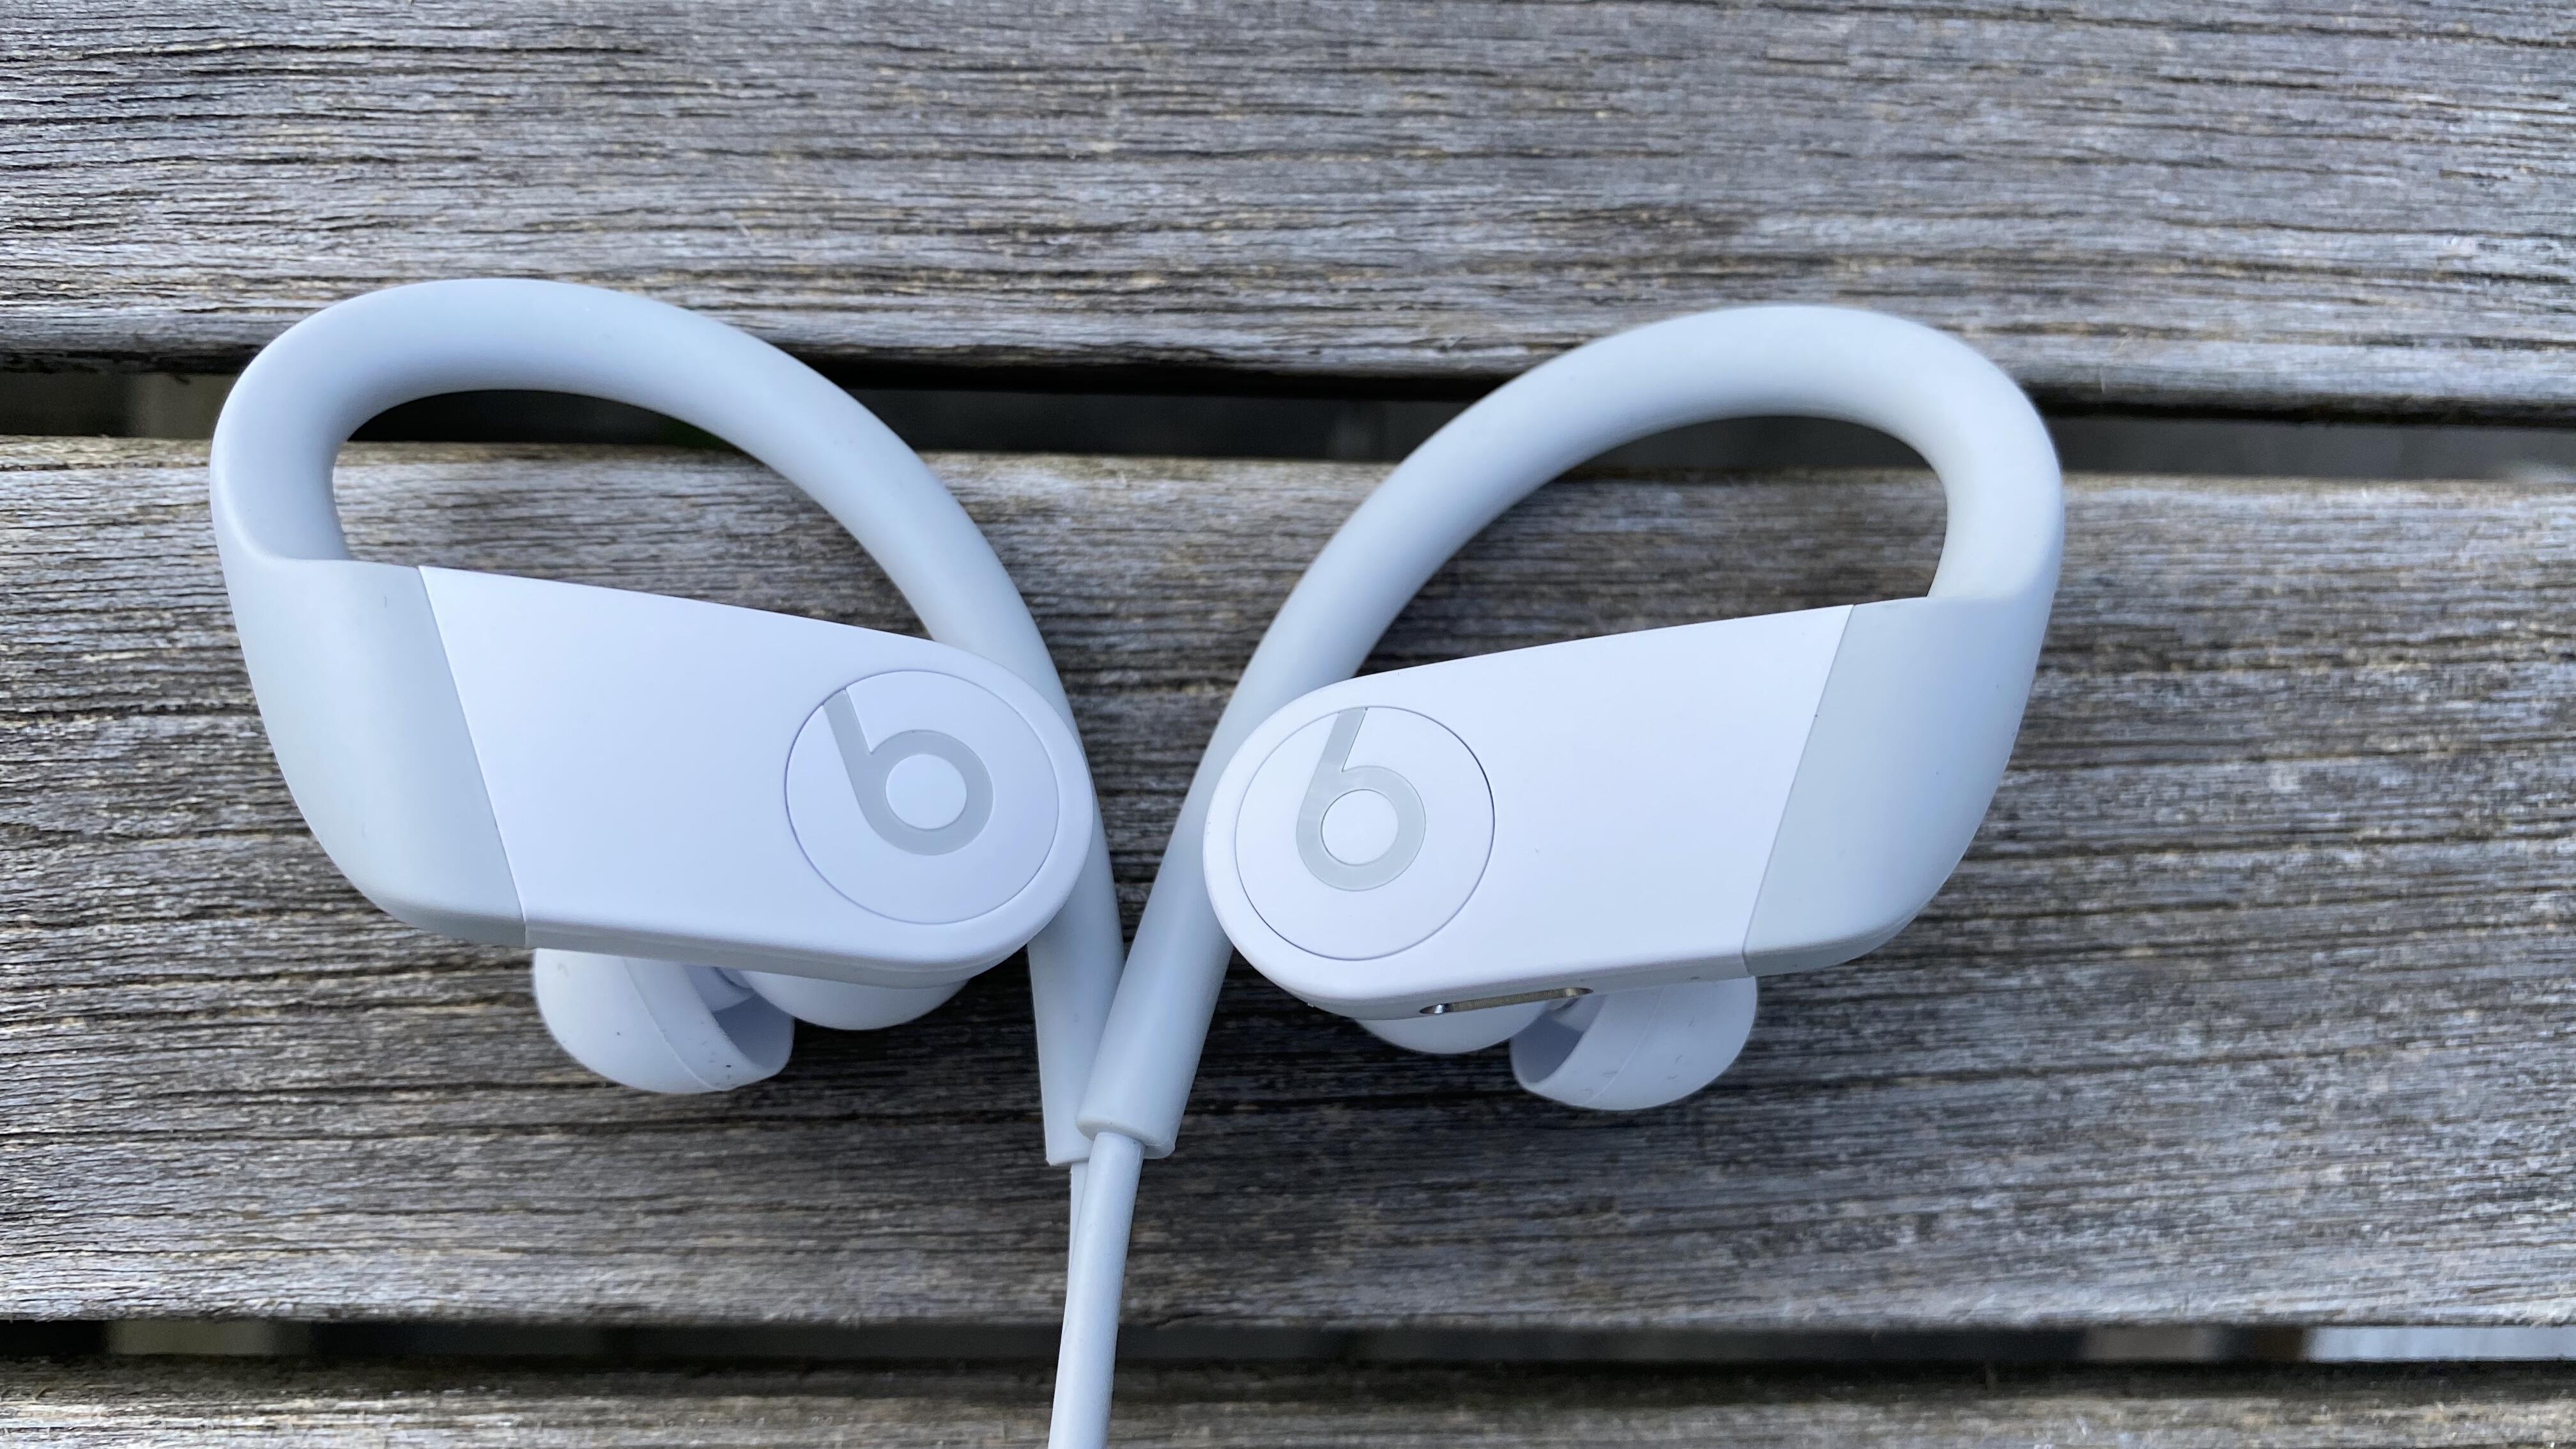 difference between powerbeats 1 and 2